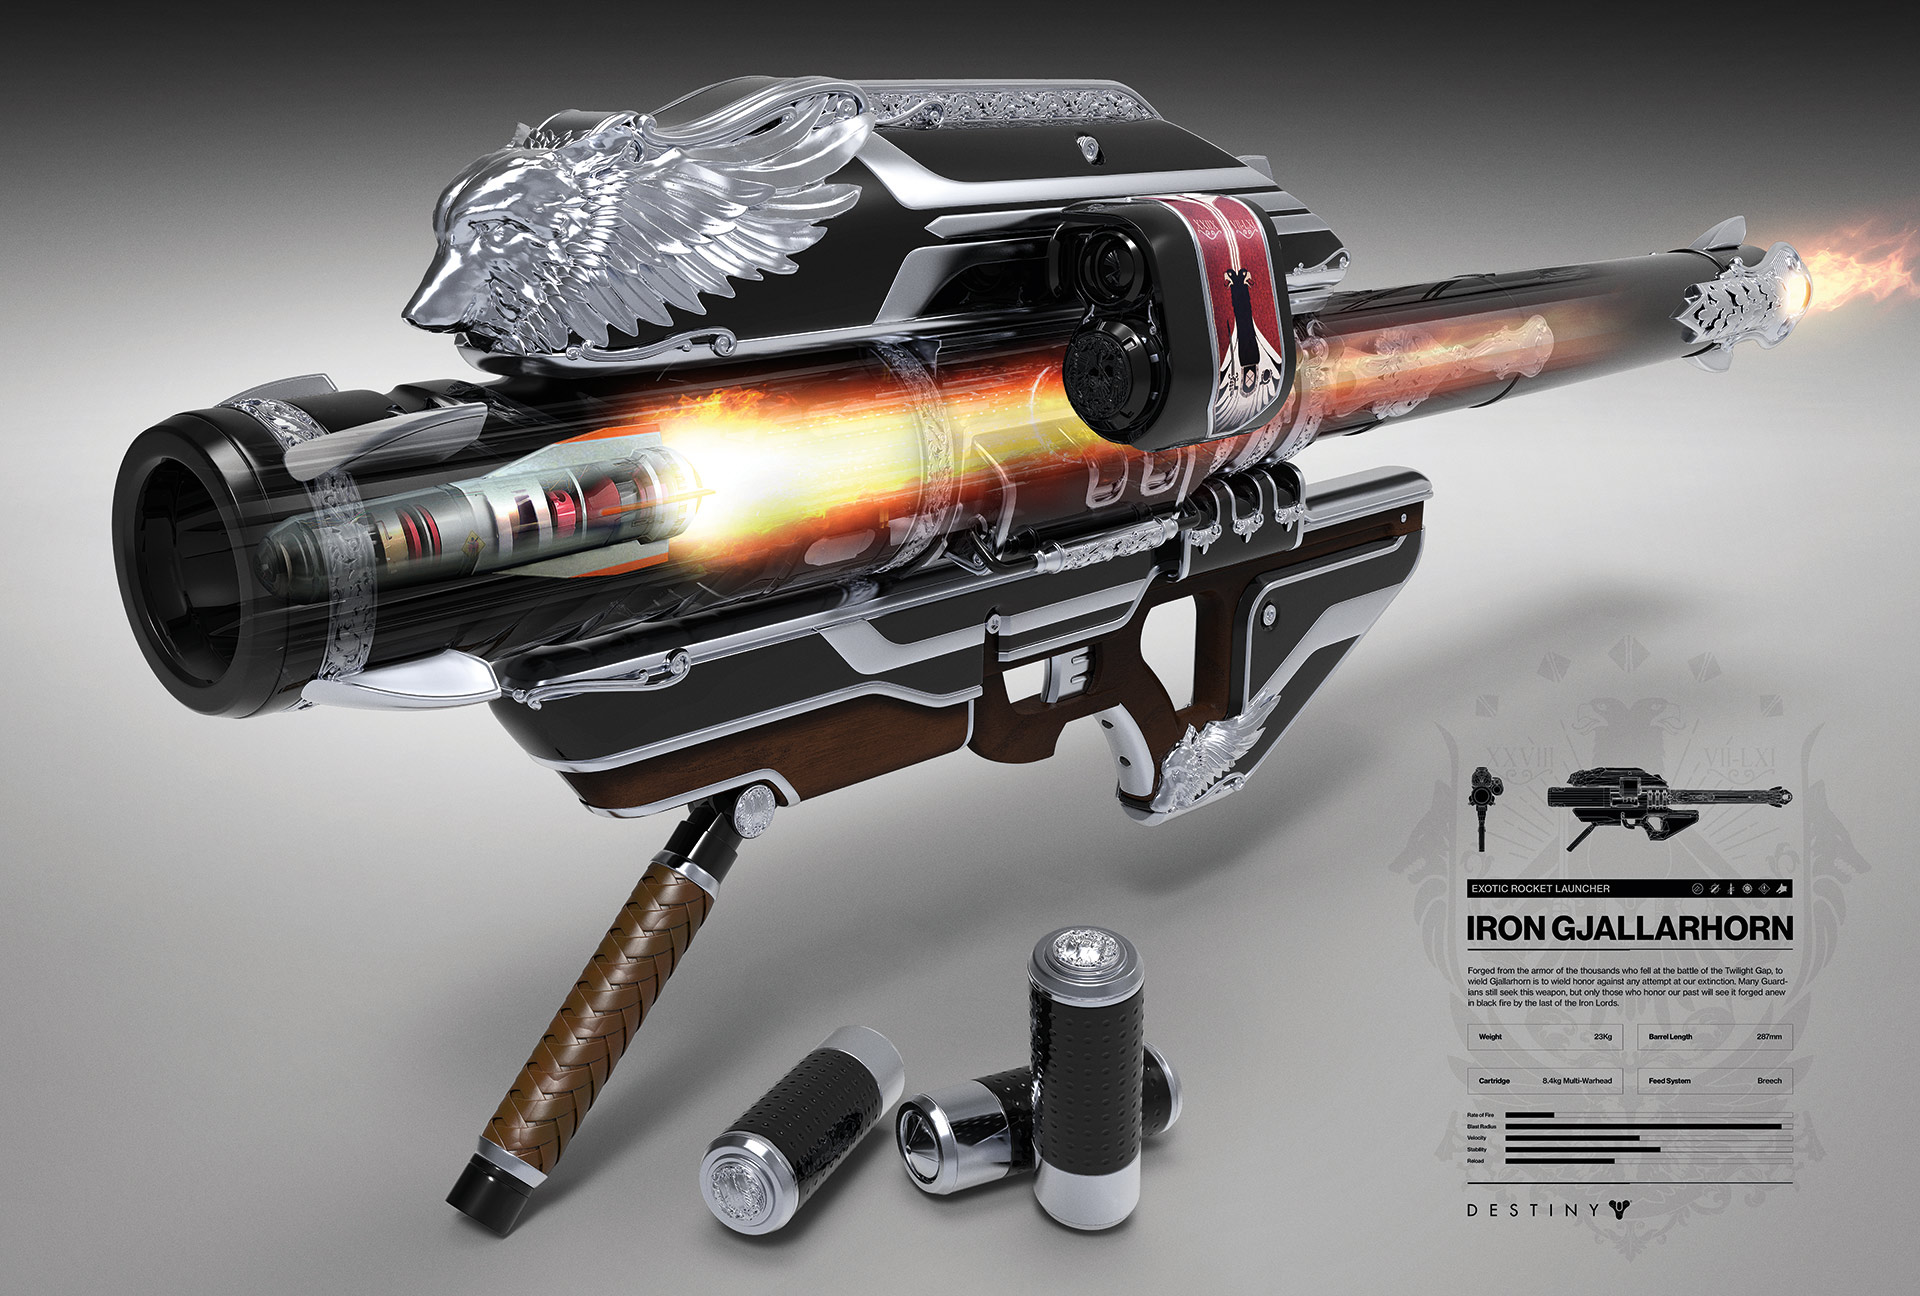 limited edition black and silver Iron Gjallarhorn